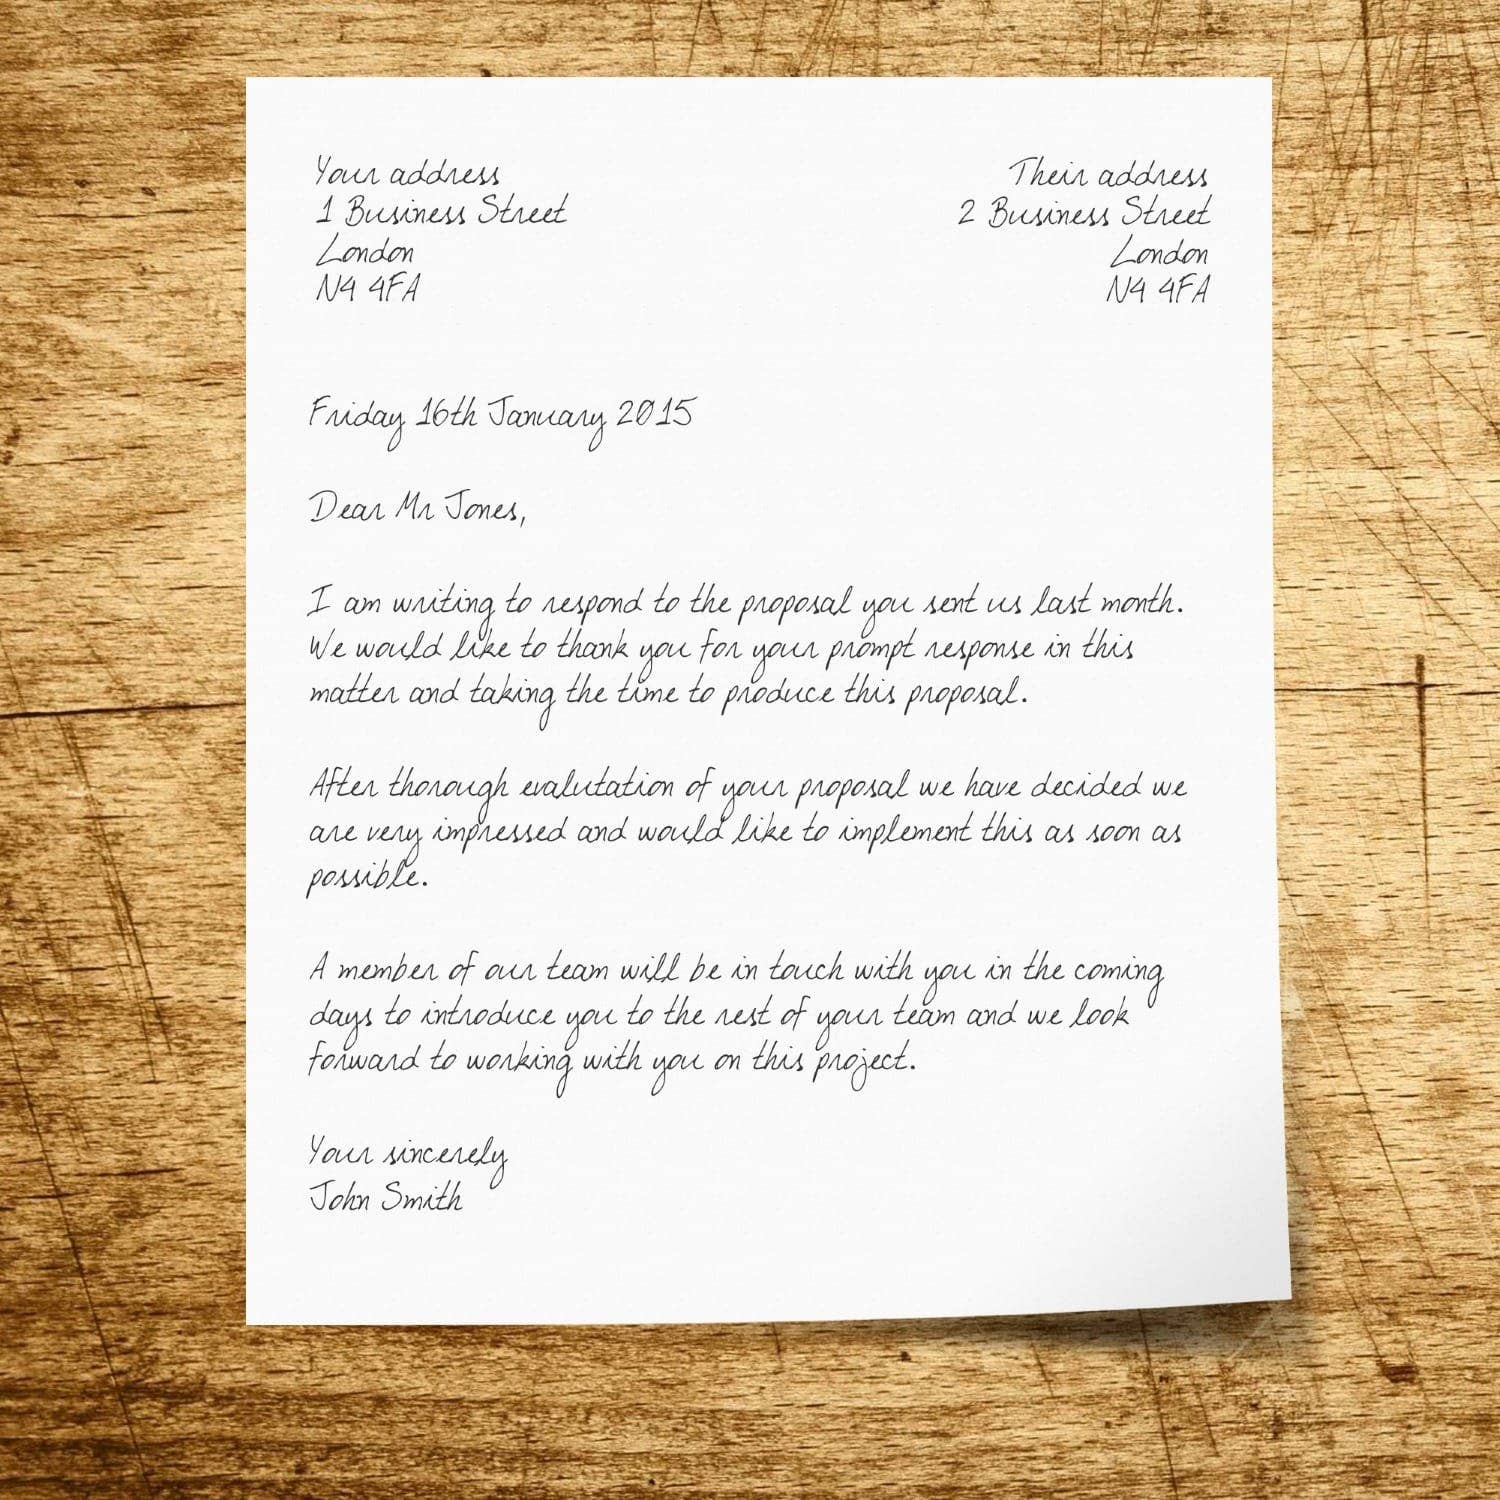 how-to-write-a-letter-in-business-letter-format-the-visual-communication-guy-design-writing